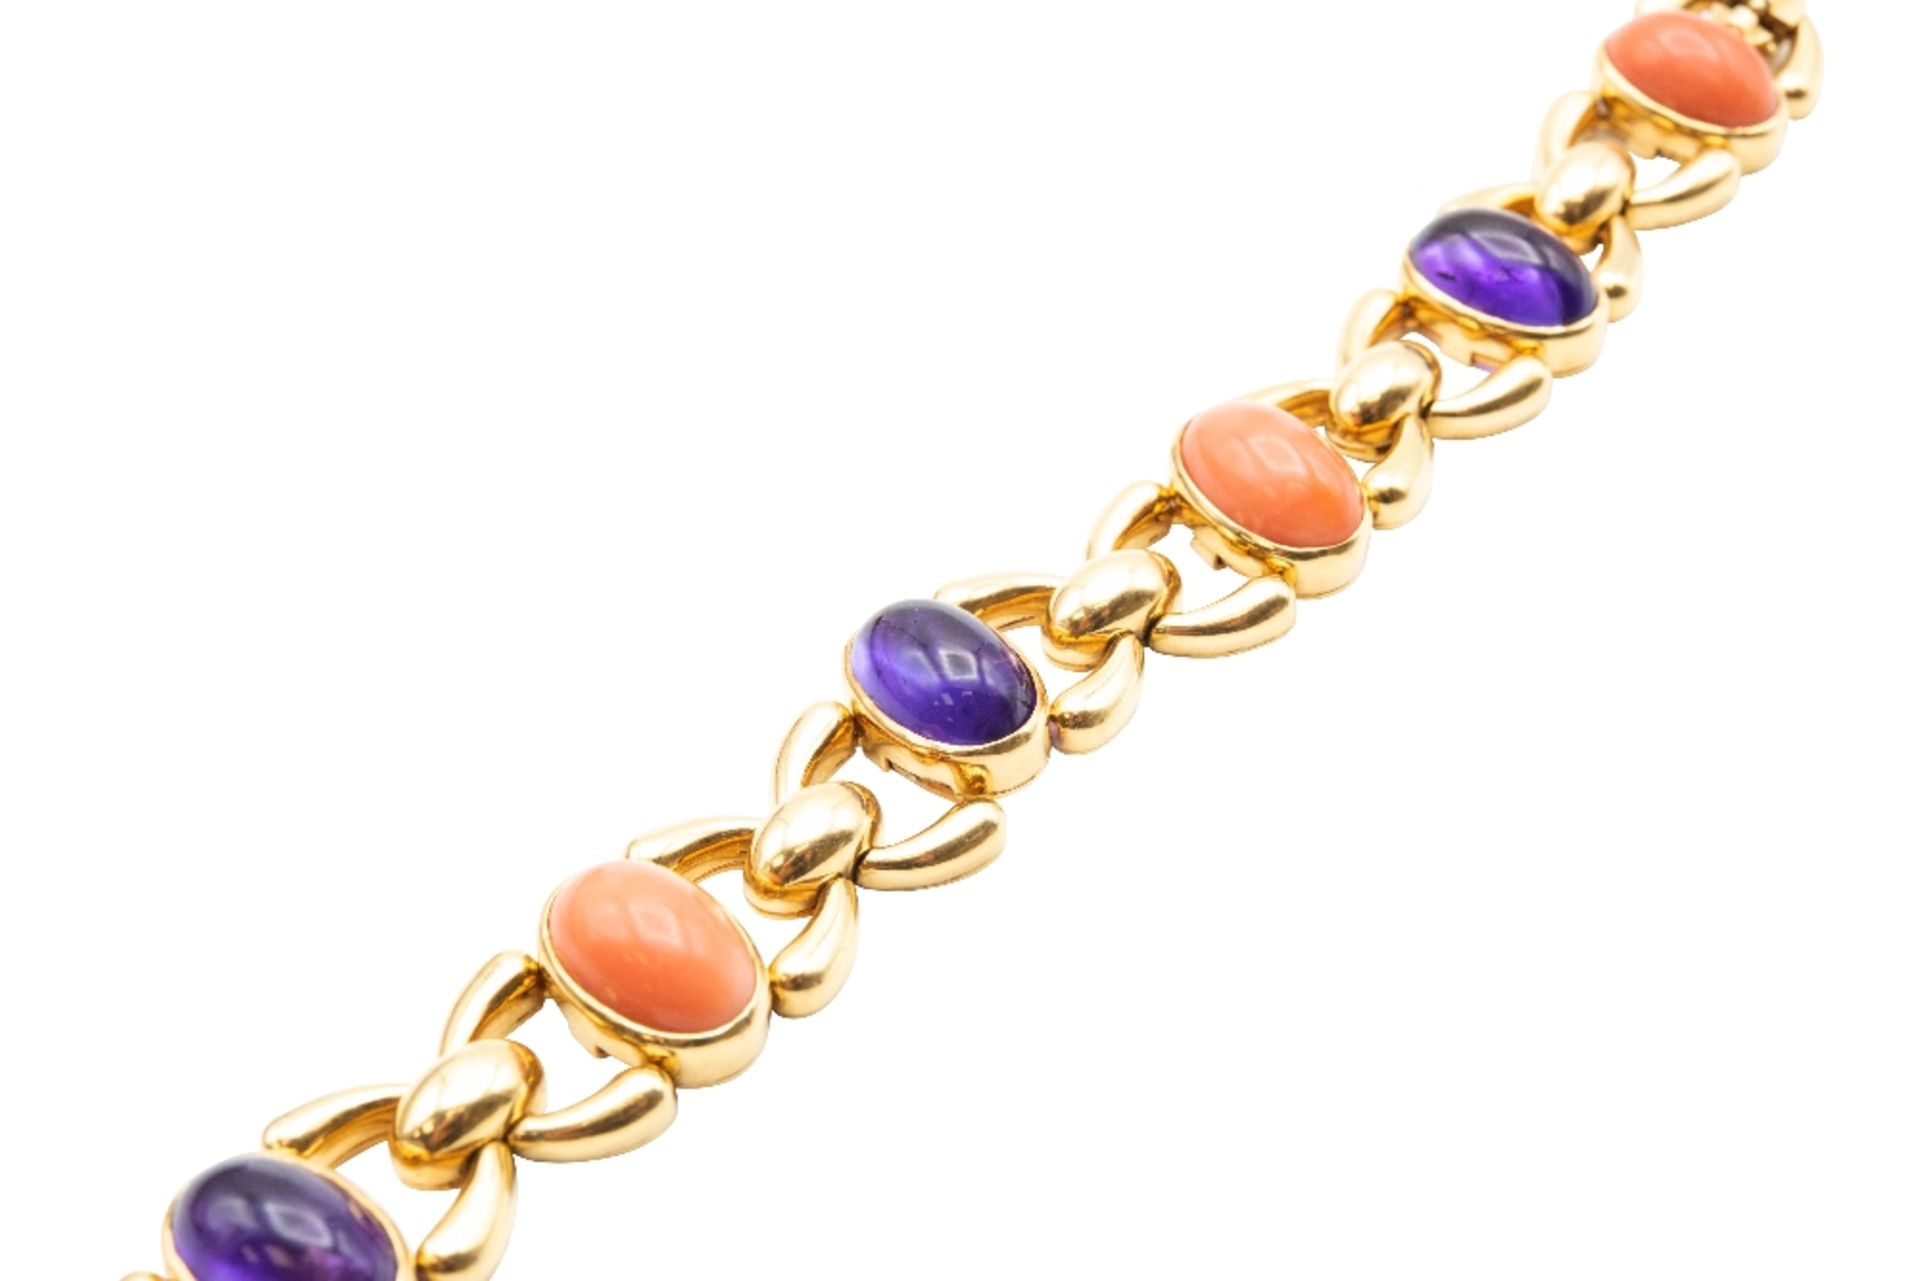 AN AMETHYST AND CORAL BRACELET, BY CARTIER